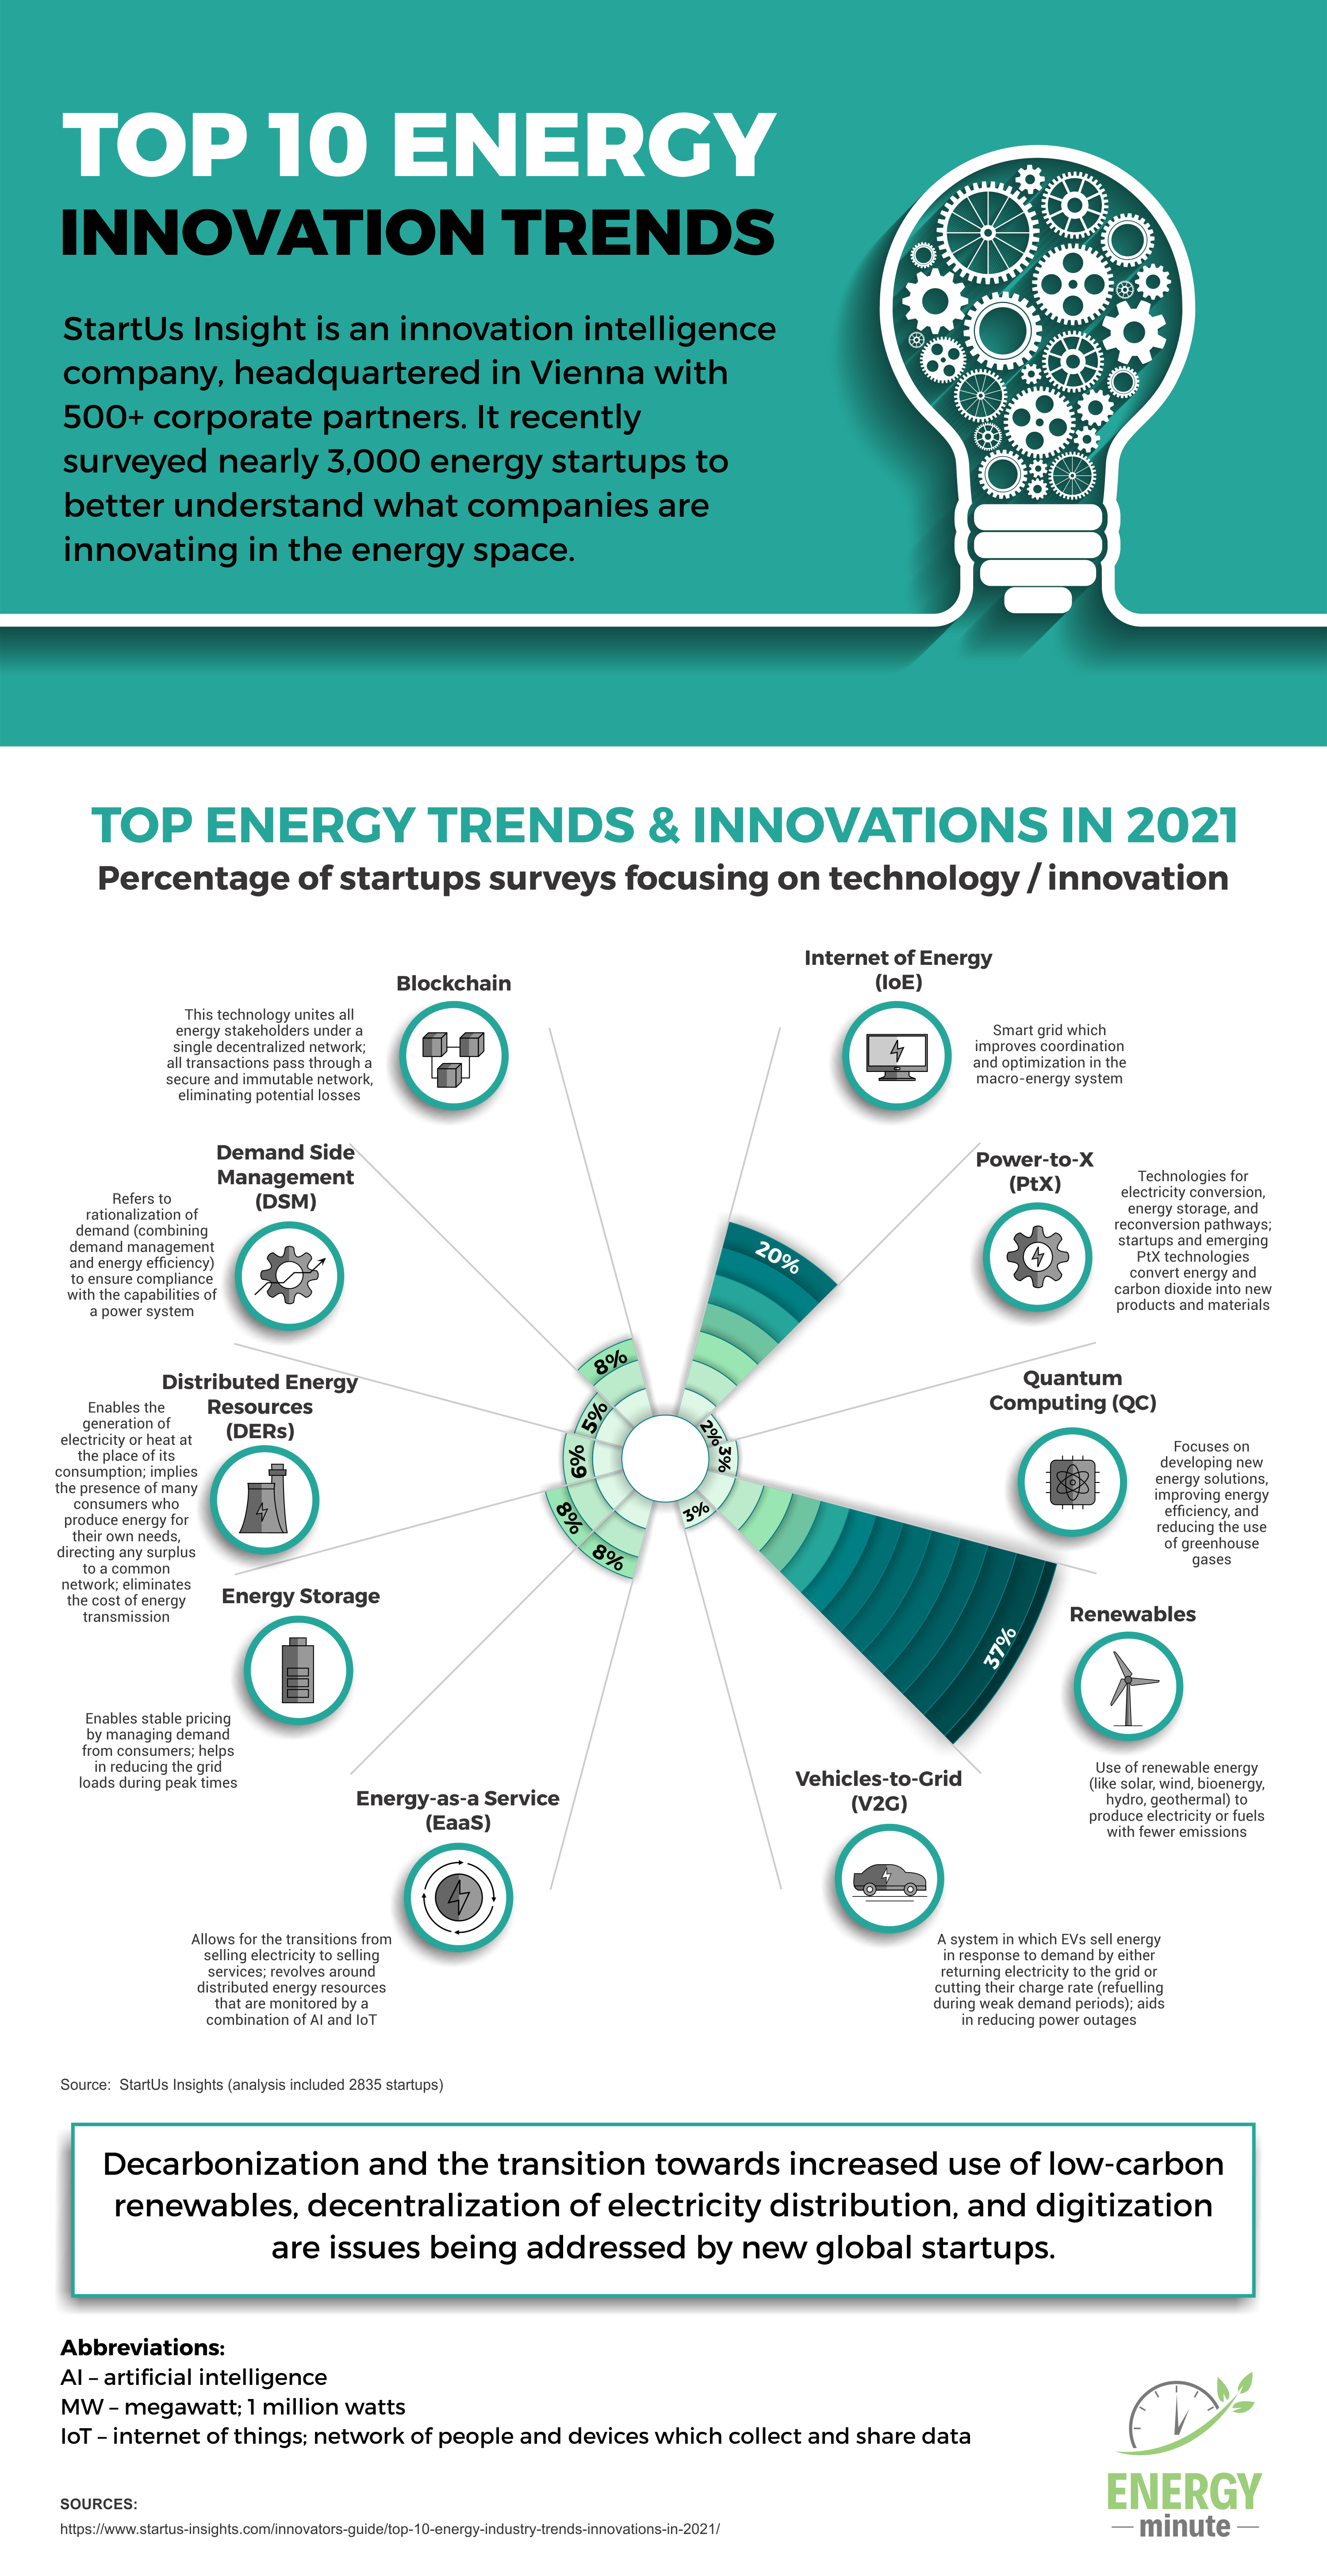 Top 10 Tech and Innovation Trends for the Energy Industry